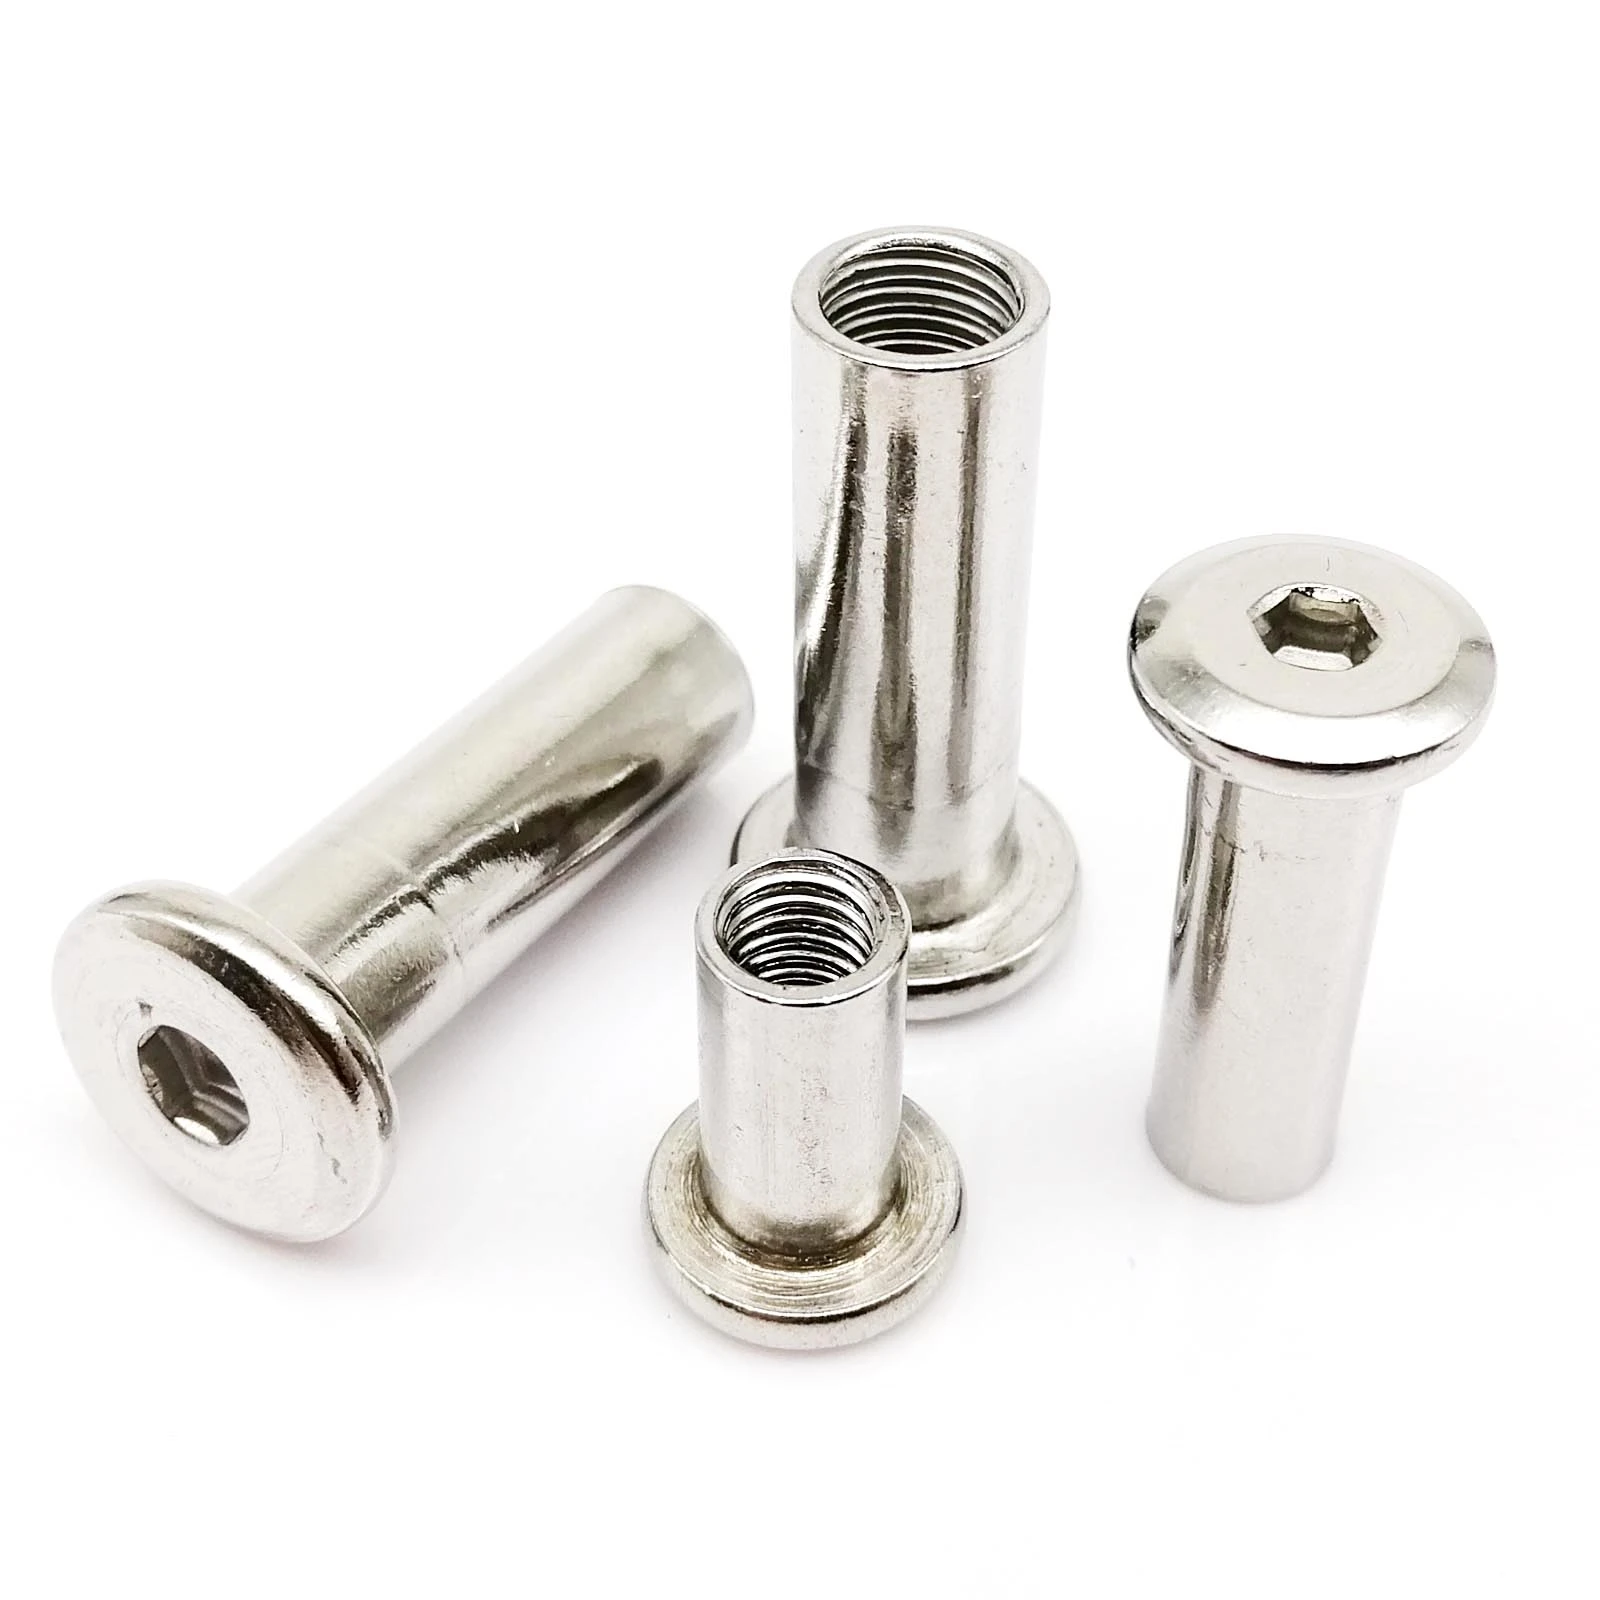 M3 M4 M5 M6 M8 304 Stainless Steel Large Flat Hex Hexagon Socket Head Connector Rivet Furniture Table Cot Bed Round Insert Nut